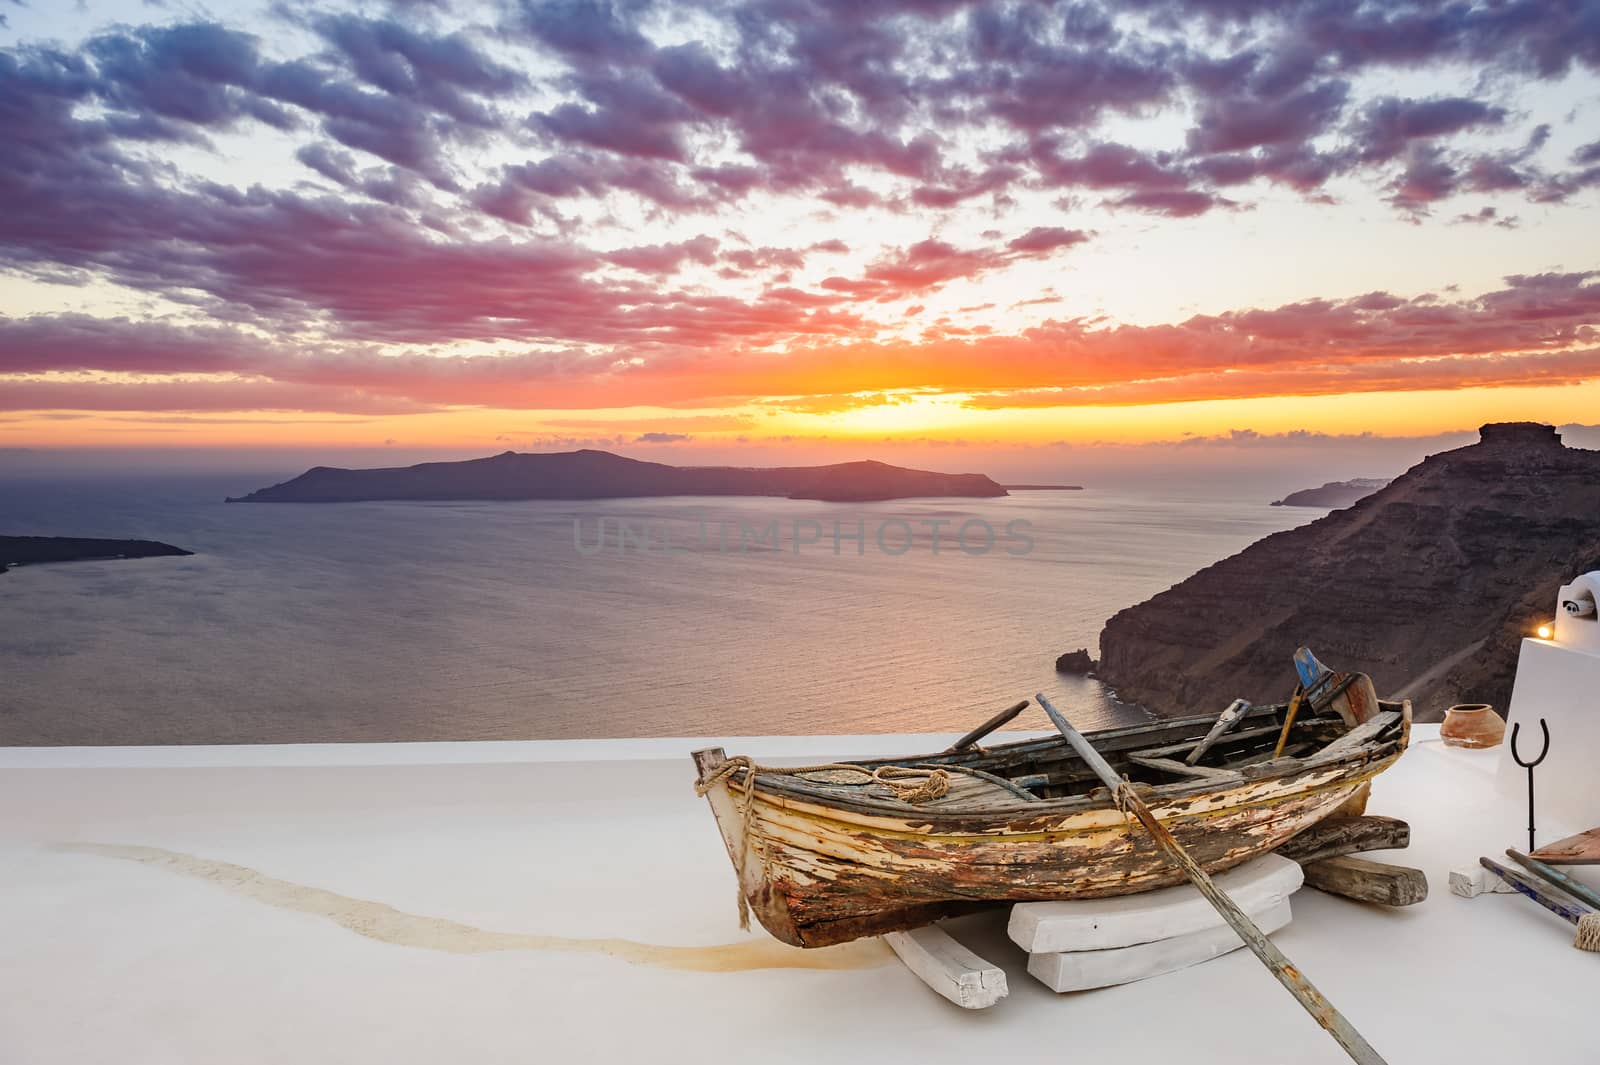 Old wooden fishermans''s boat on roofof house in Firostefani village with typical white architecture, Santorini island, Greece, during sunset over sea.